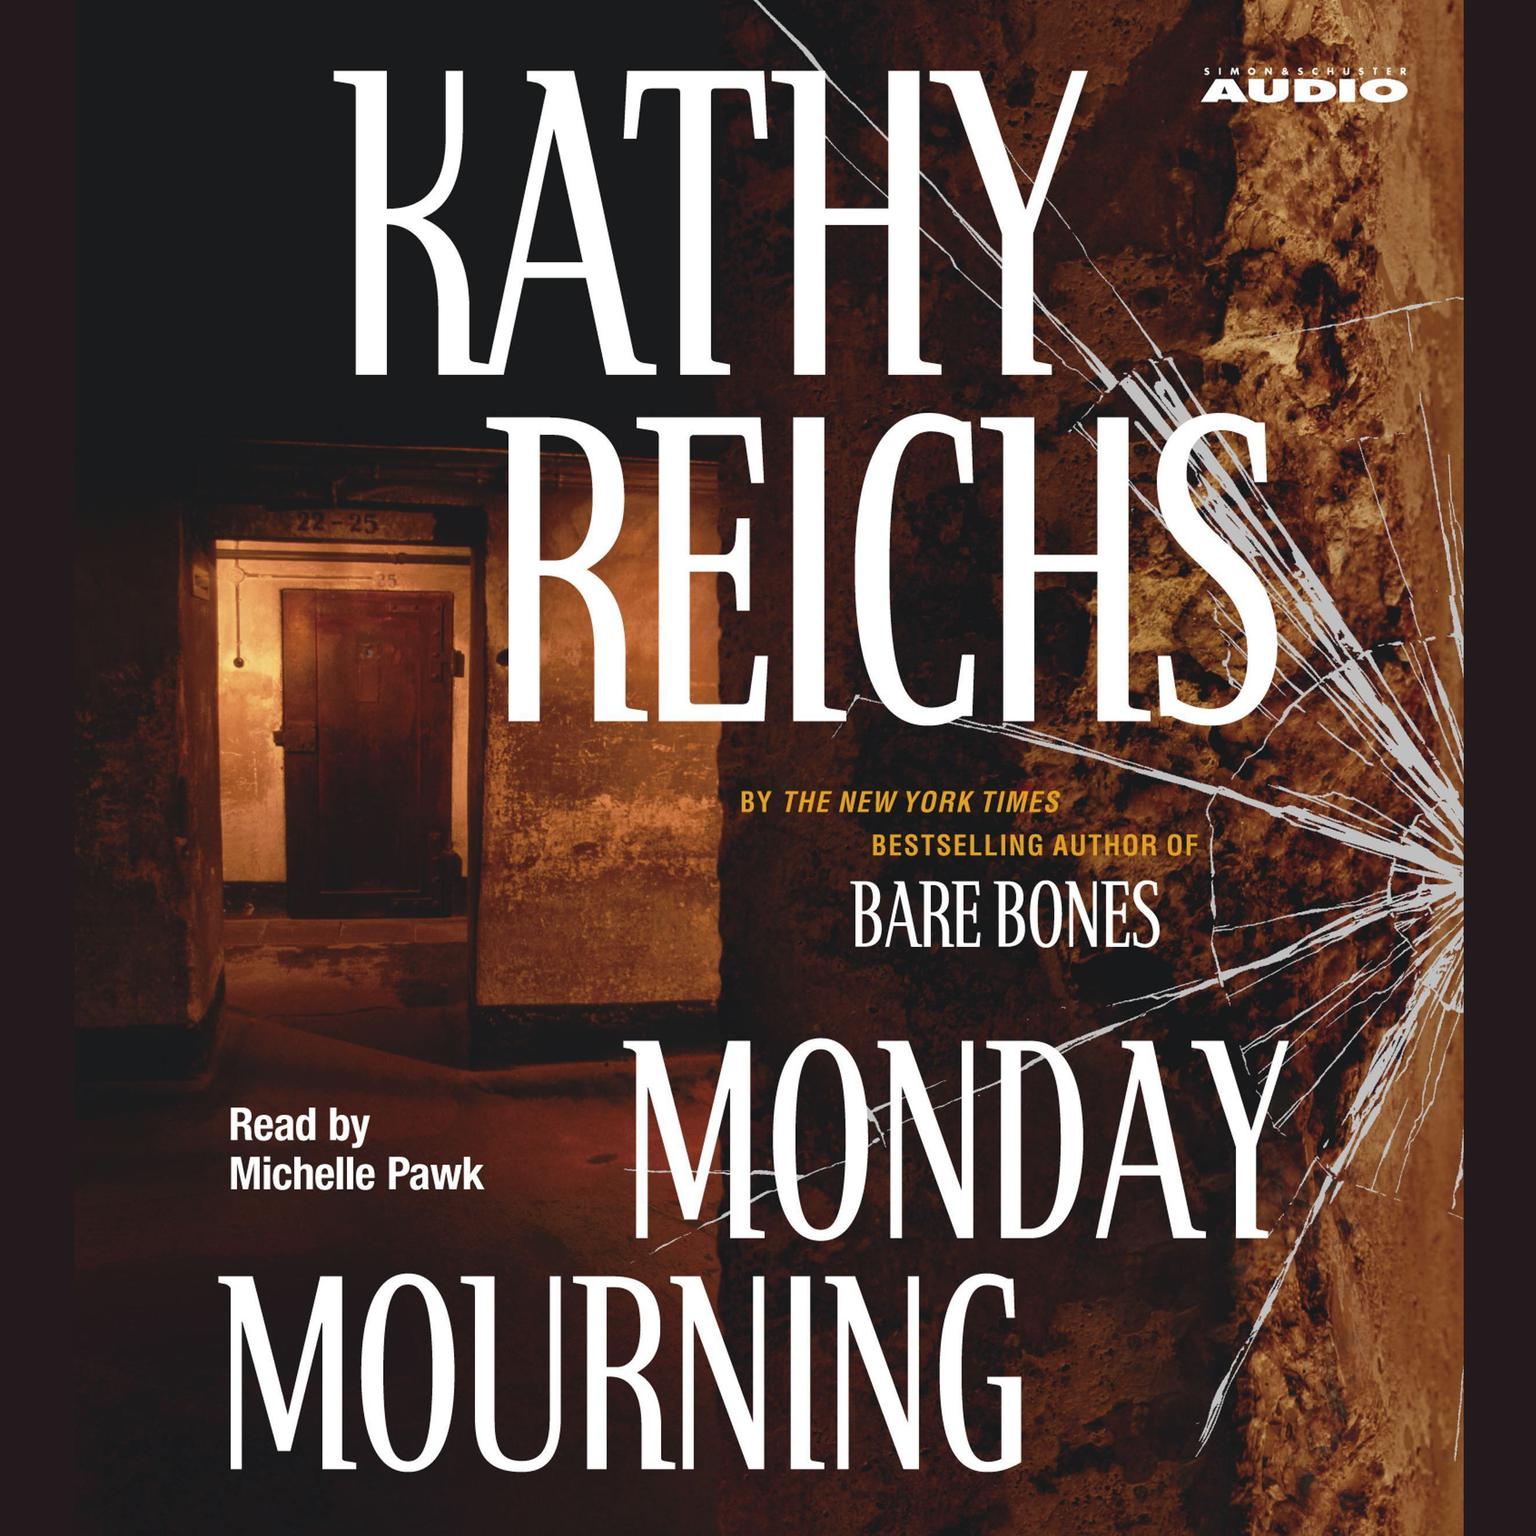 Monday Mourning (Abridged): A Novel Audiobook, by Kathy Reichs